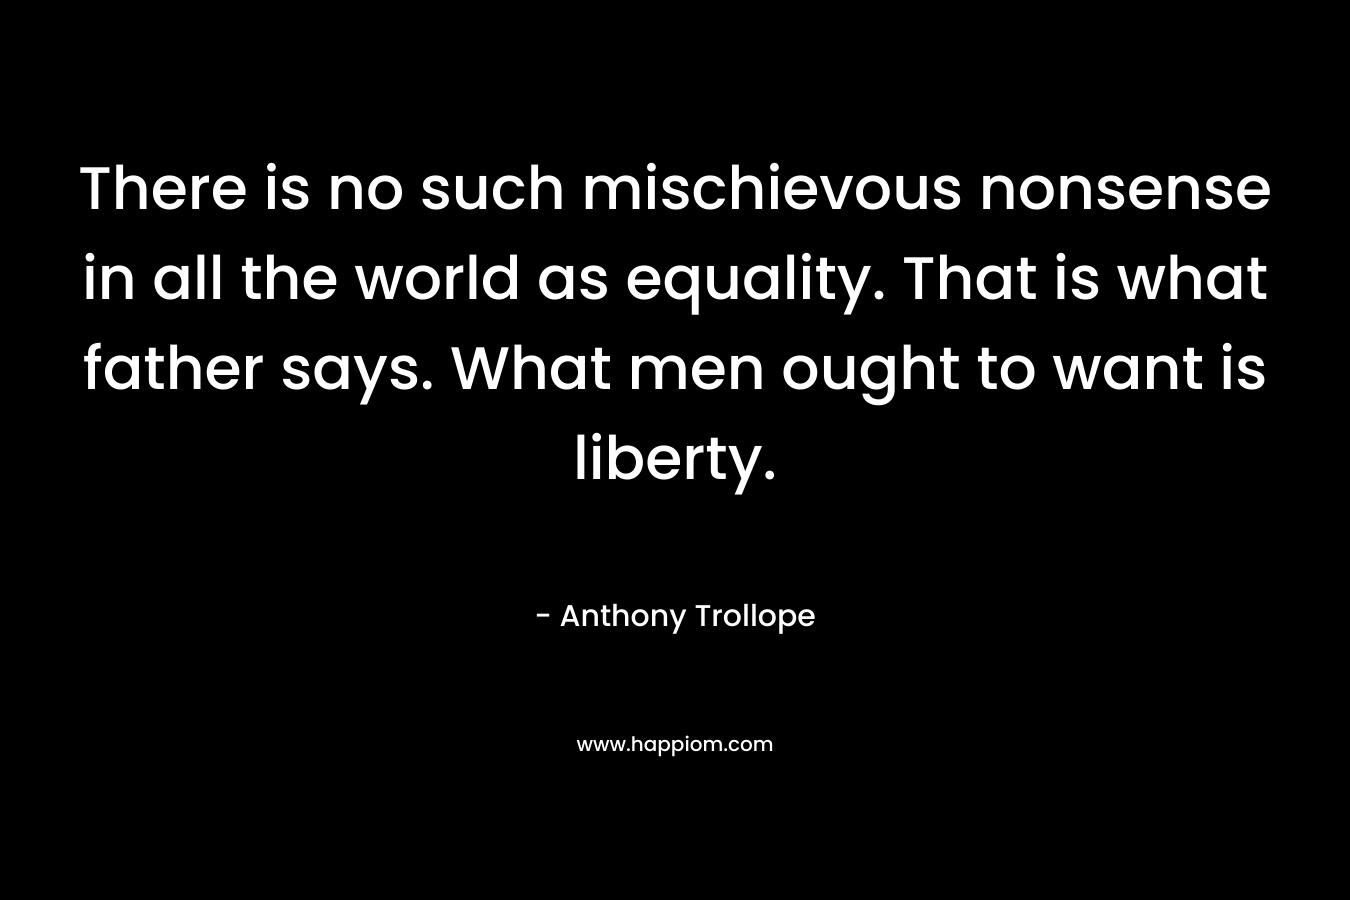 There is no such mischievous nonsense in all the world as equality. That is what father says. What men ought to want is liberty. – Anthony Trollope